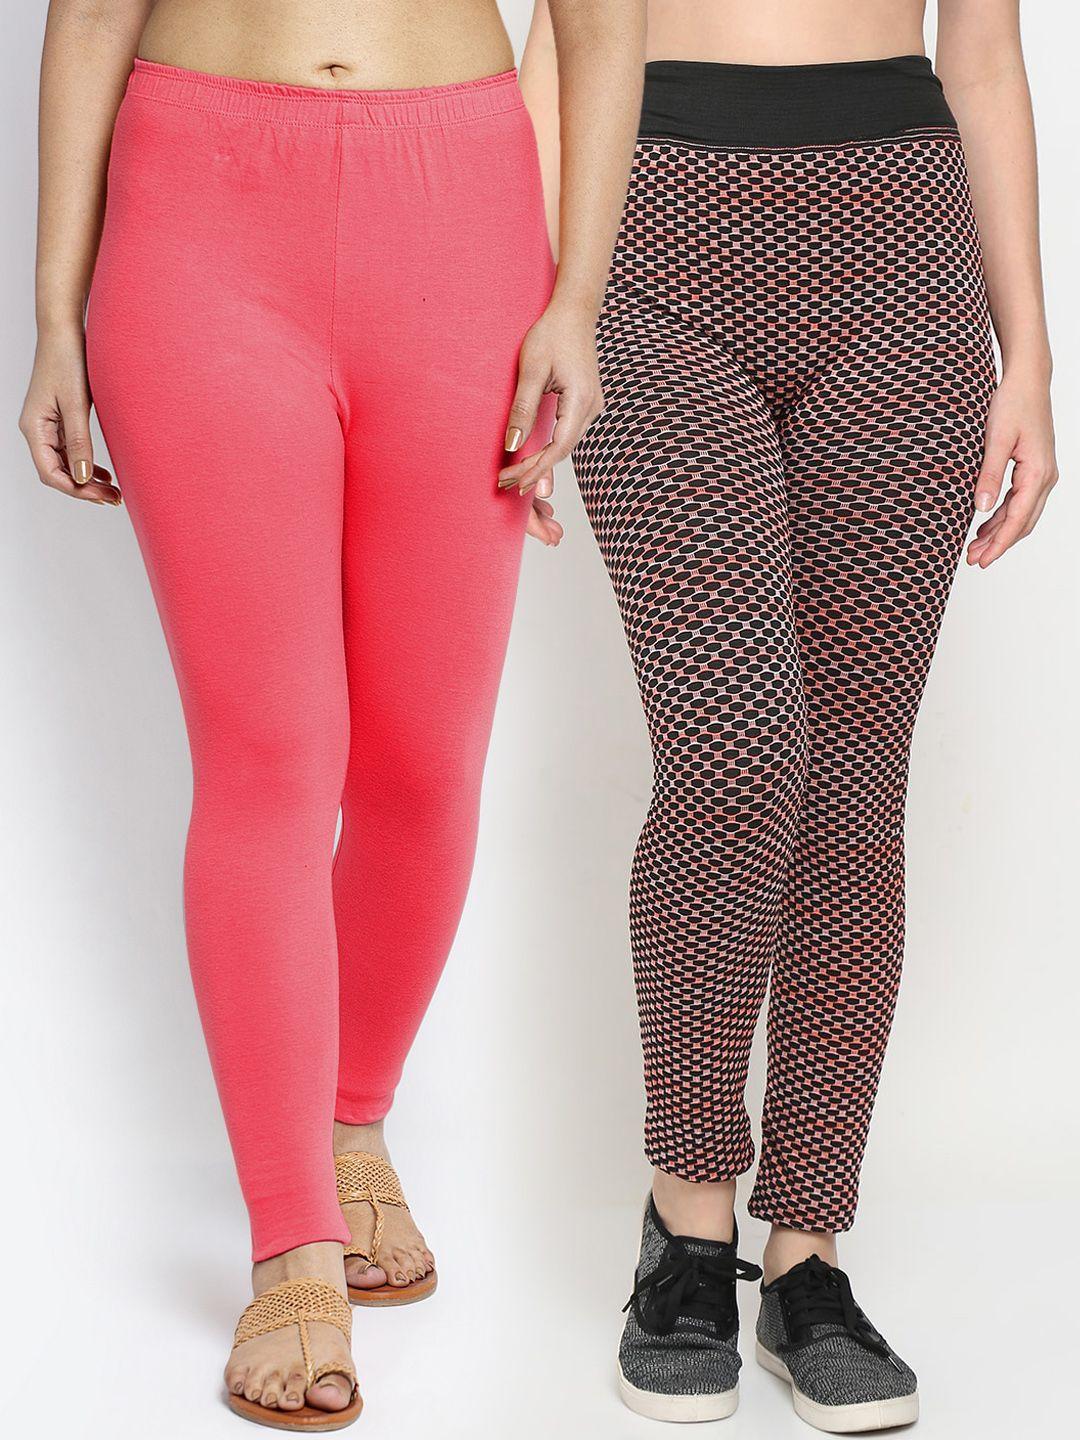 gracit women pack of 2 peach & black solid legging printed gym tights